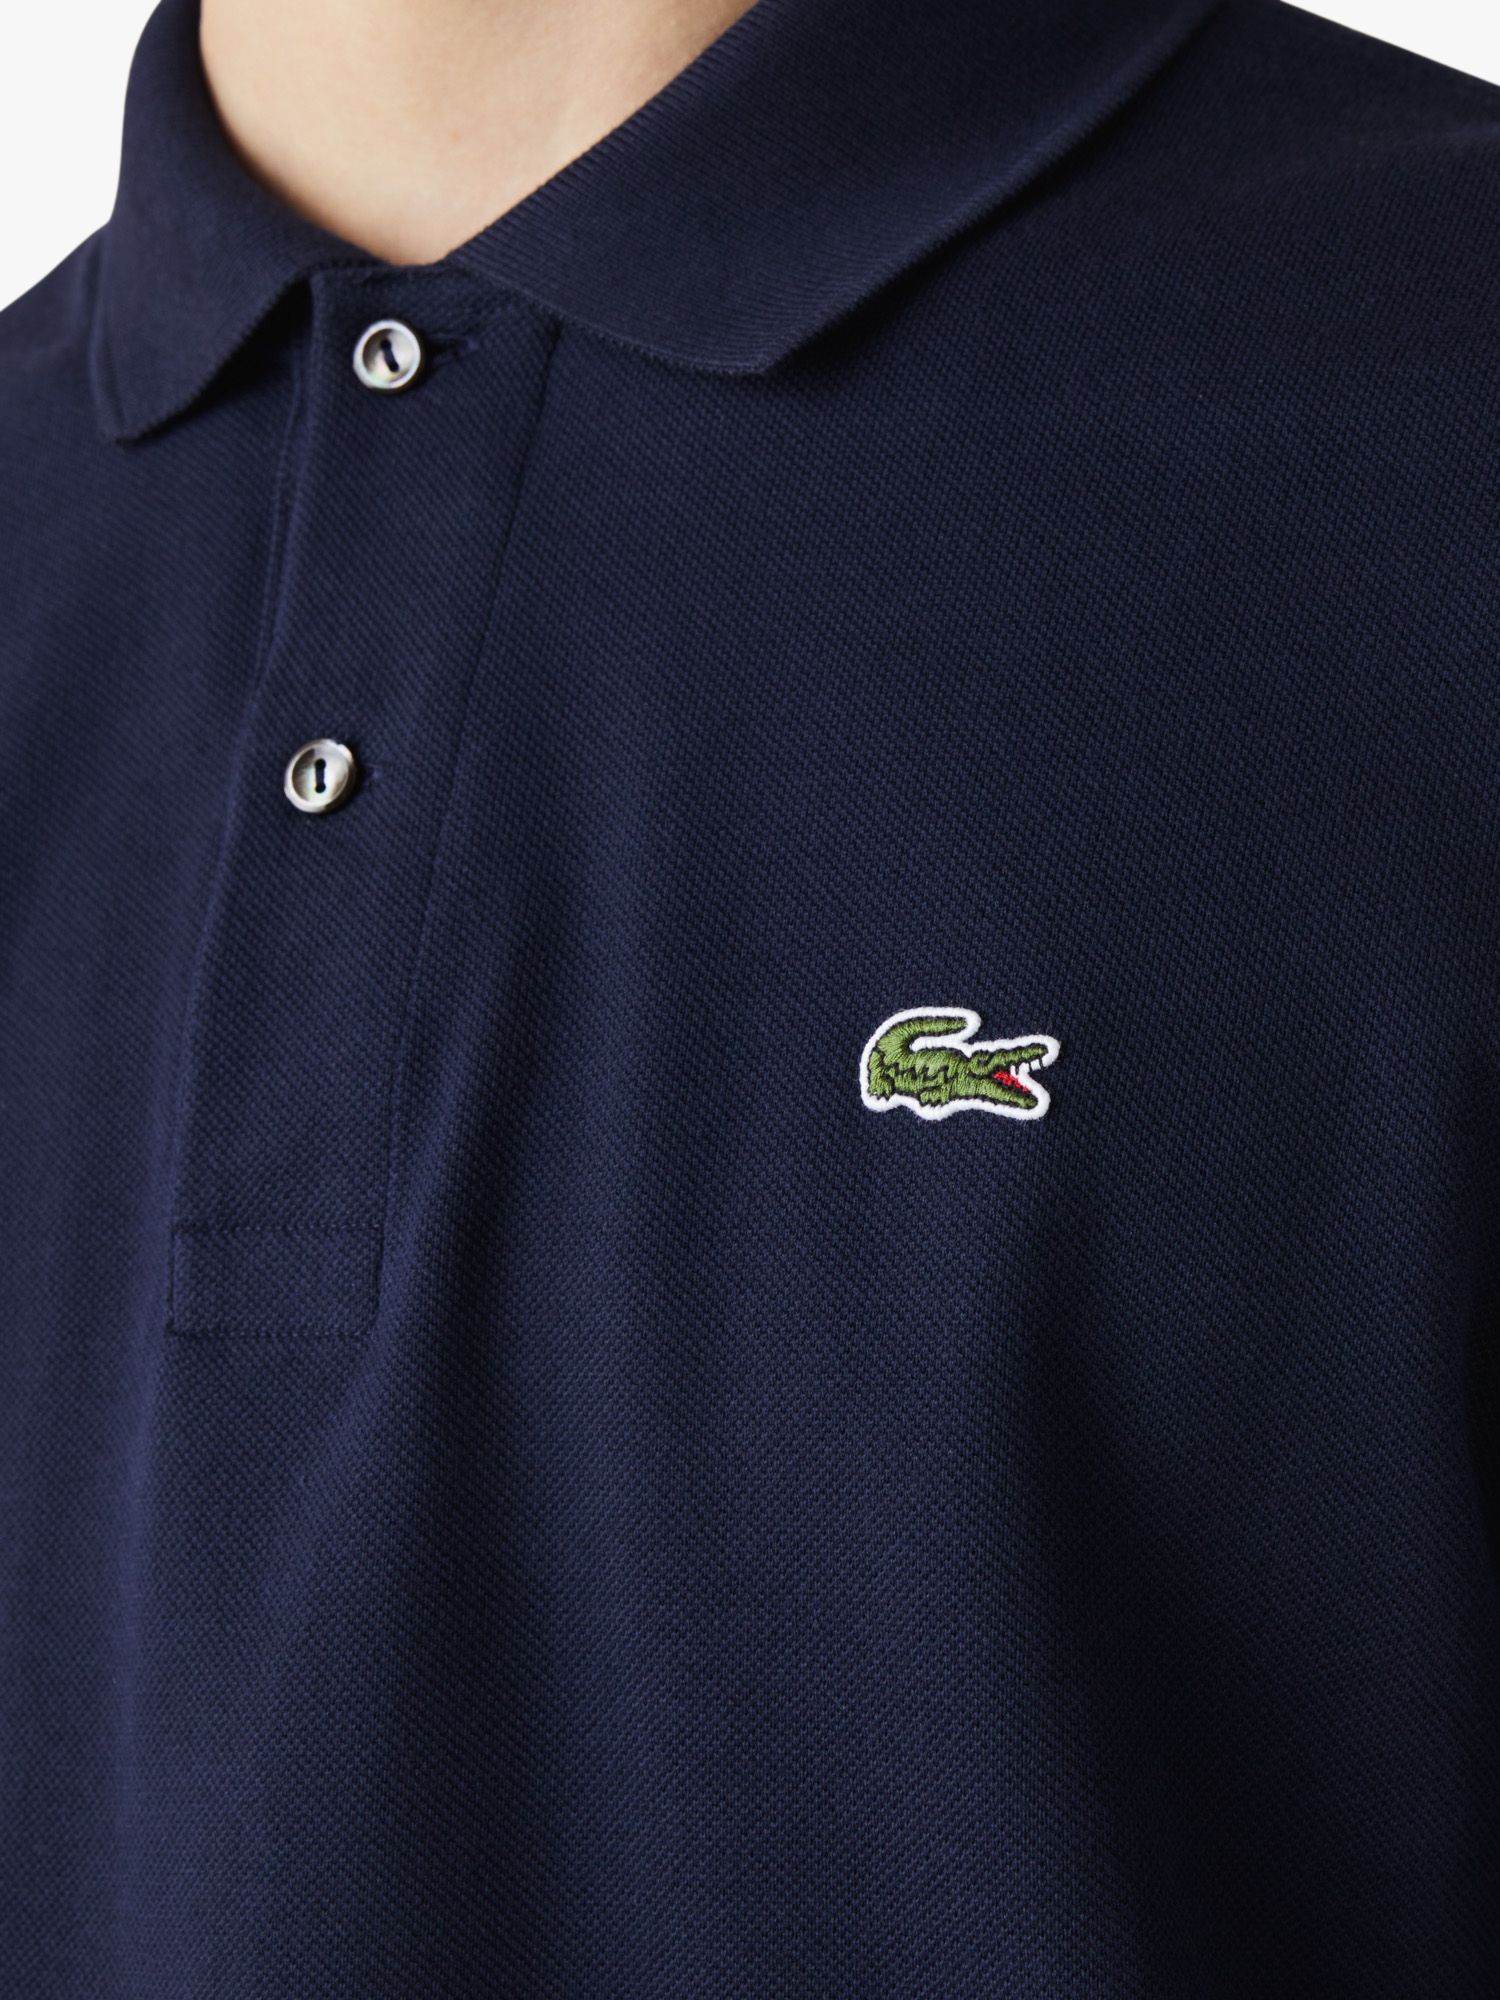 Lacoste L.13.12 Classic Regular Fit Long Sleeve Polo Shirt, 166 Navy Blue, S